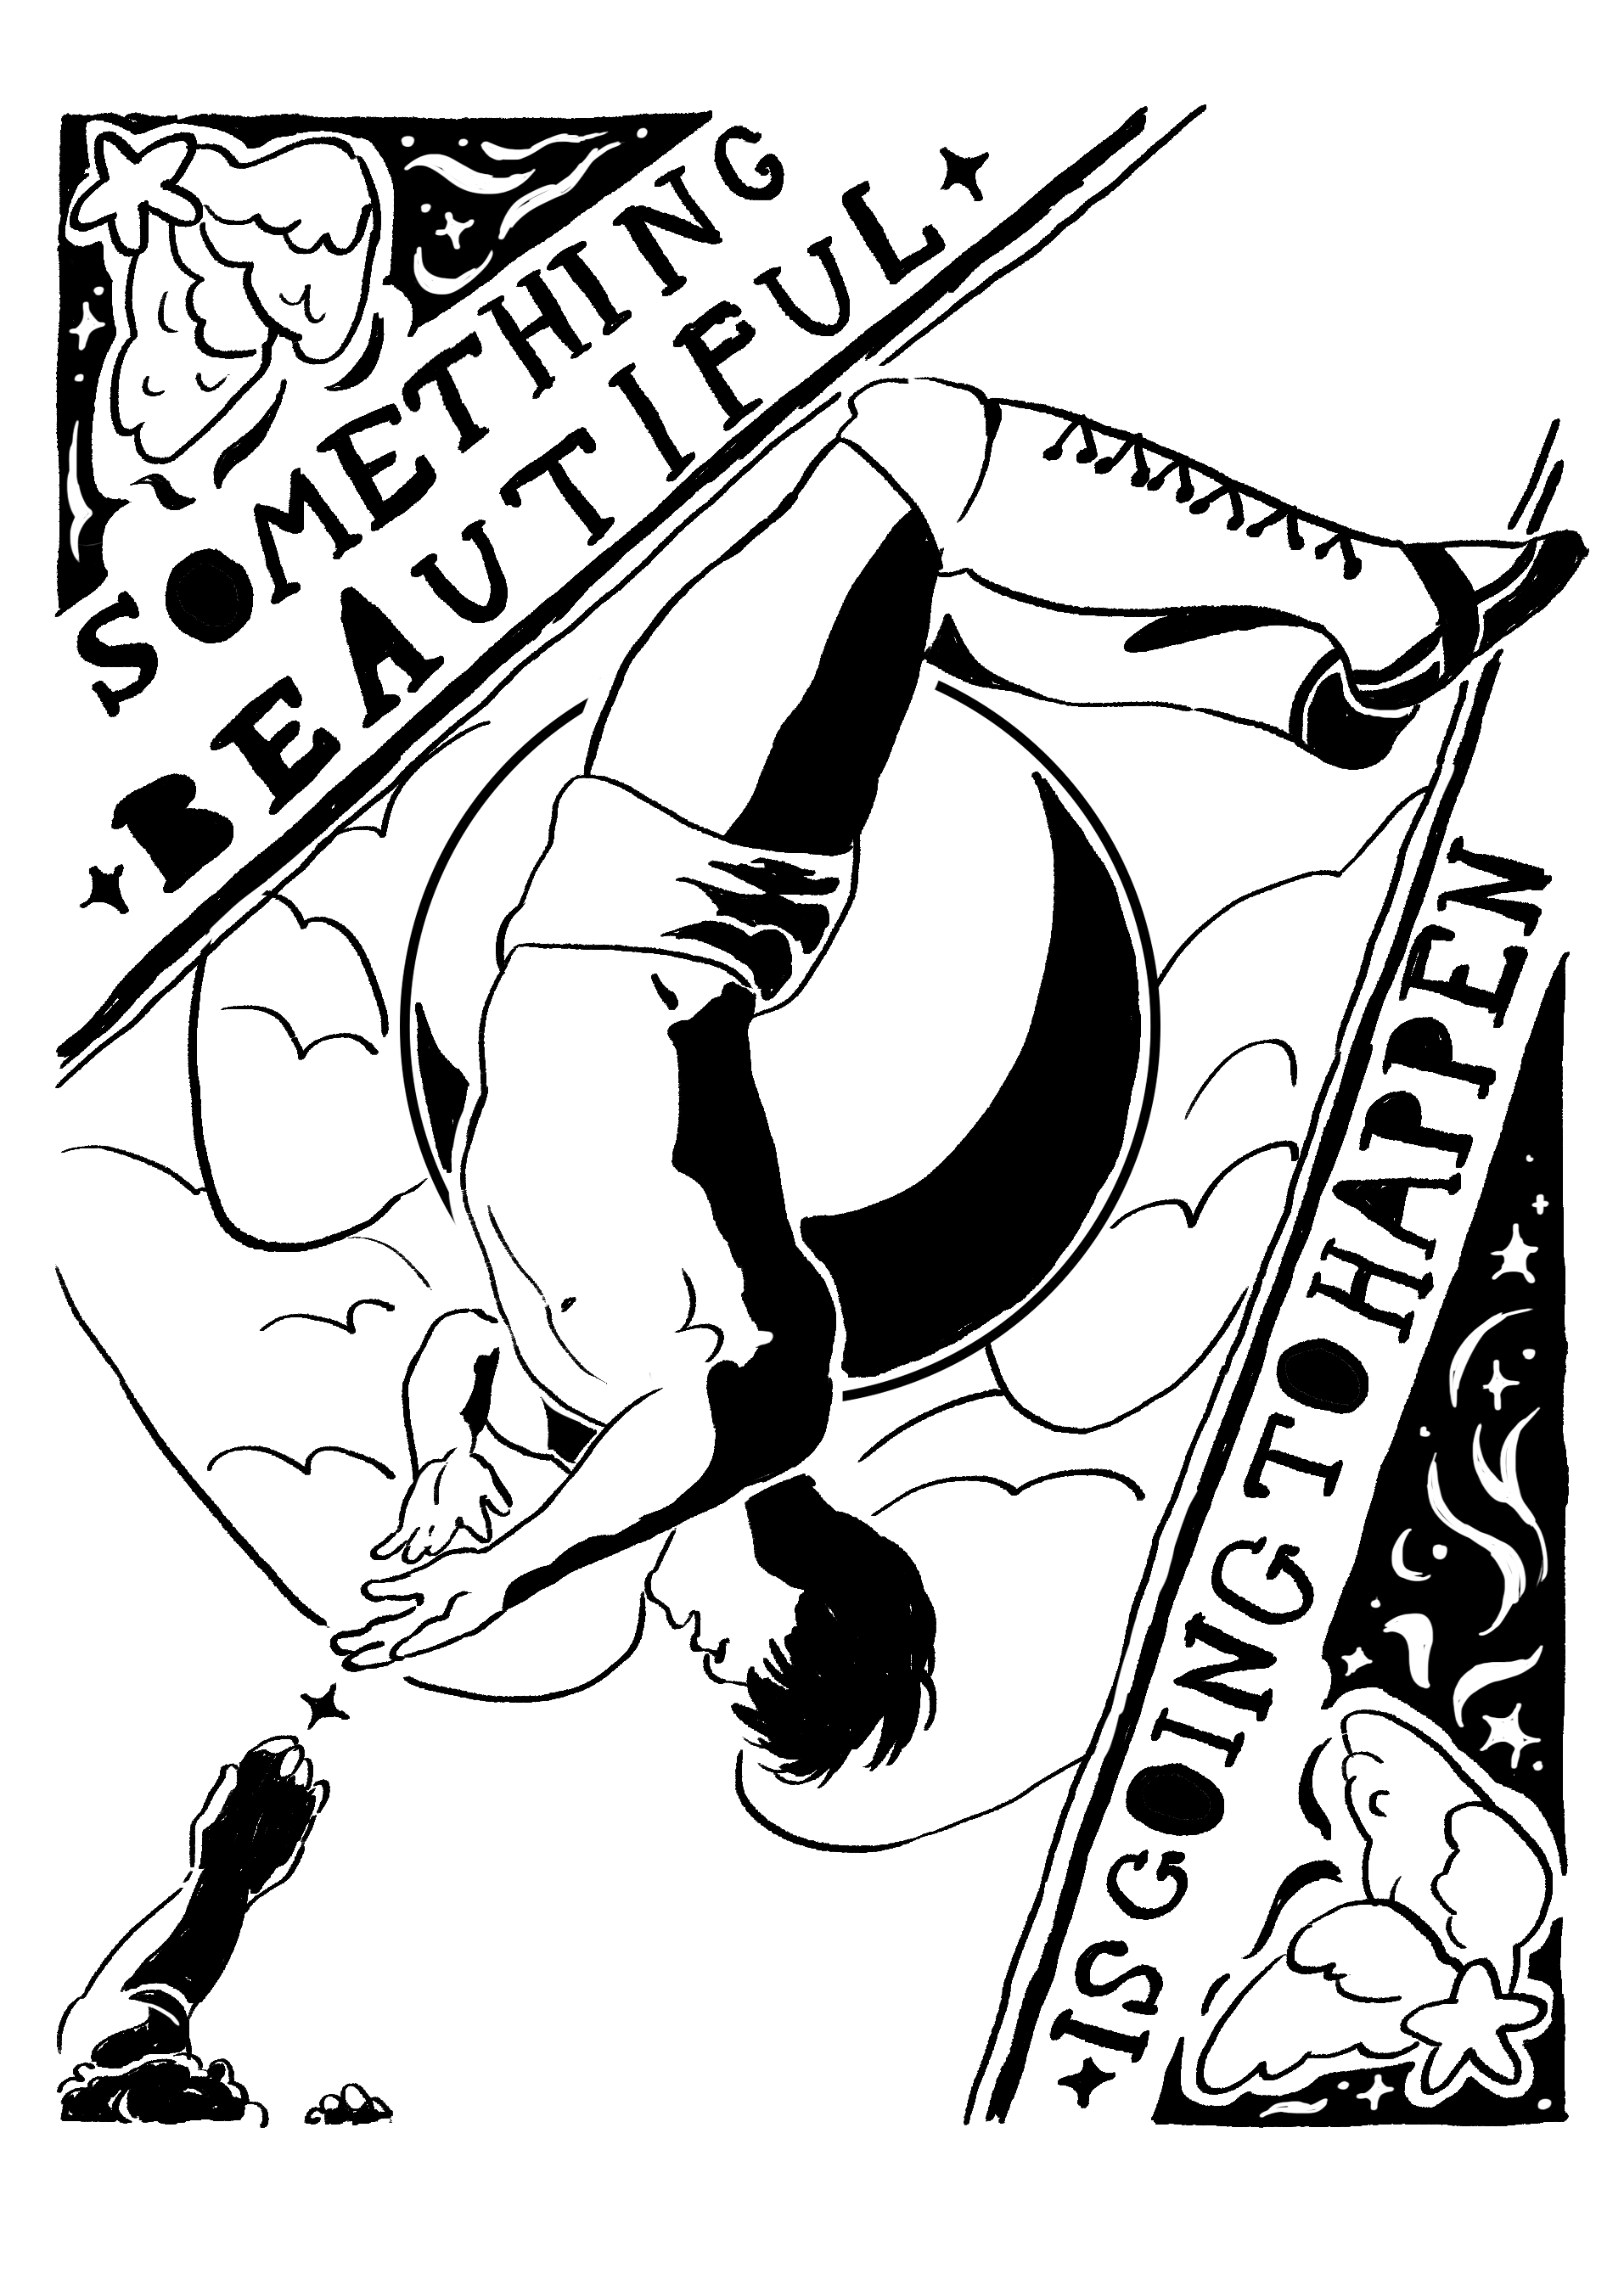 Black and white digital linoprint style illustration of someone performing a moonsault from a high place, suspended in a spotlight, with a moon and wings behind them. Another figure is reaching up to catch them, and where their hands are about to meet, there's a tiny star. There is filigree in the shape of stars with wings in the corner, and the text 'SOMETHING BEAUTIFUL IS GOING TO HAPPEN.'